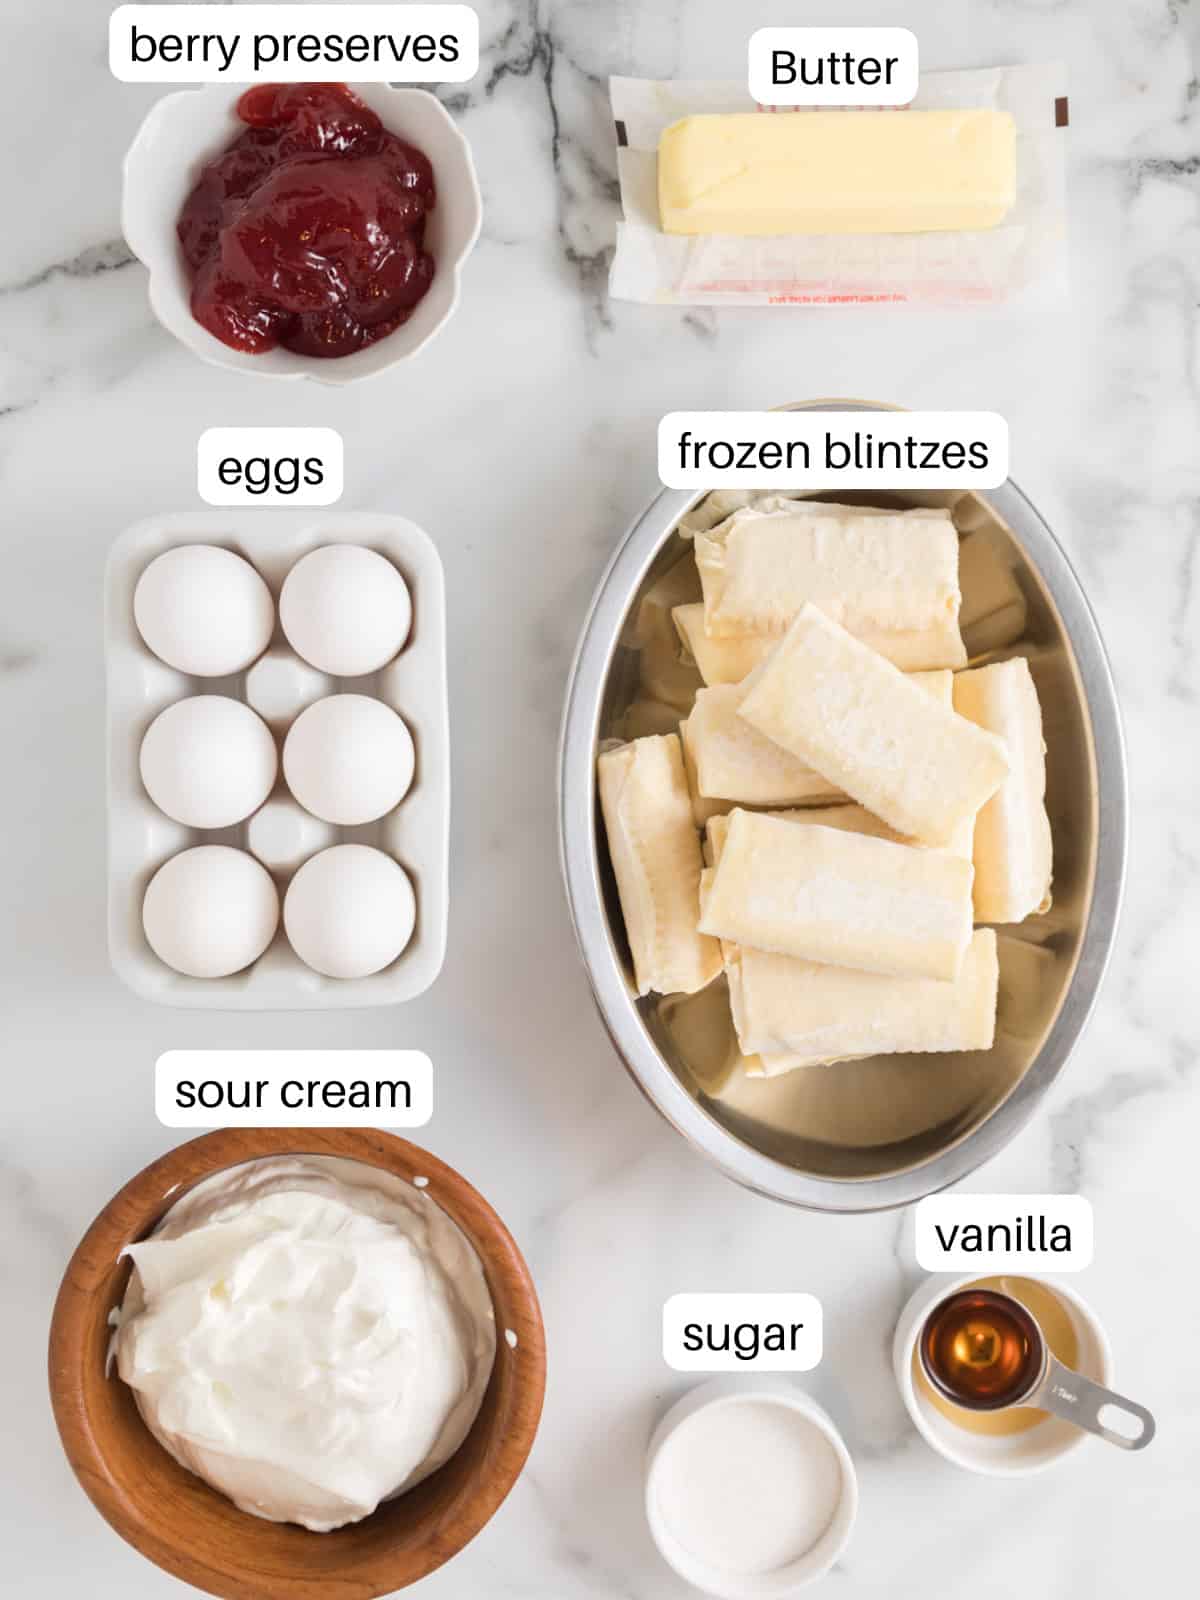 Ingredients for blintz souffle in little bowls including frozen blintzes, cream cheese, and eggs.